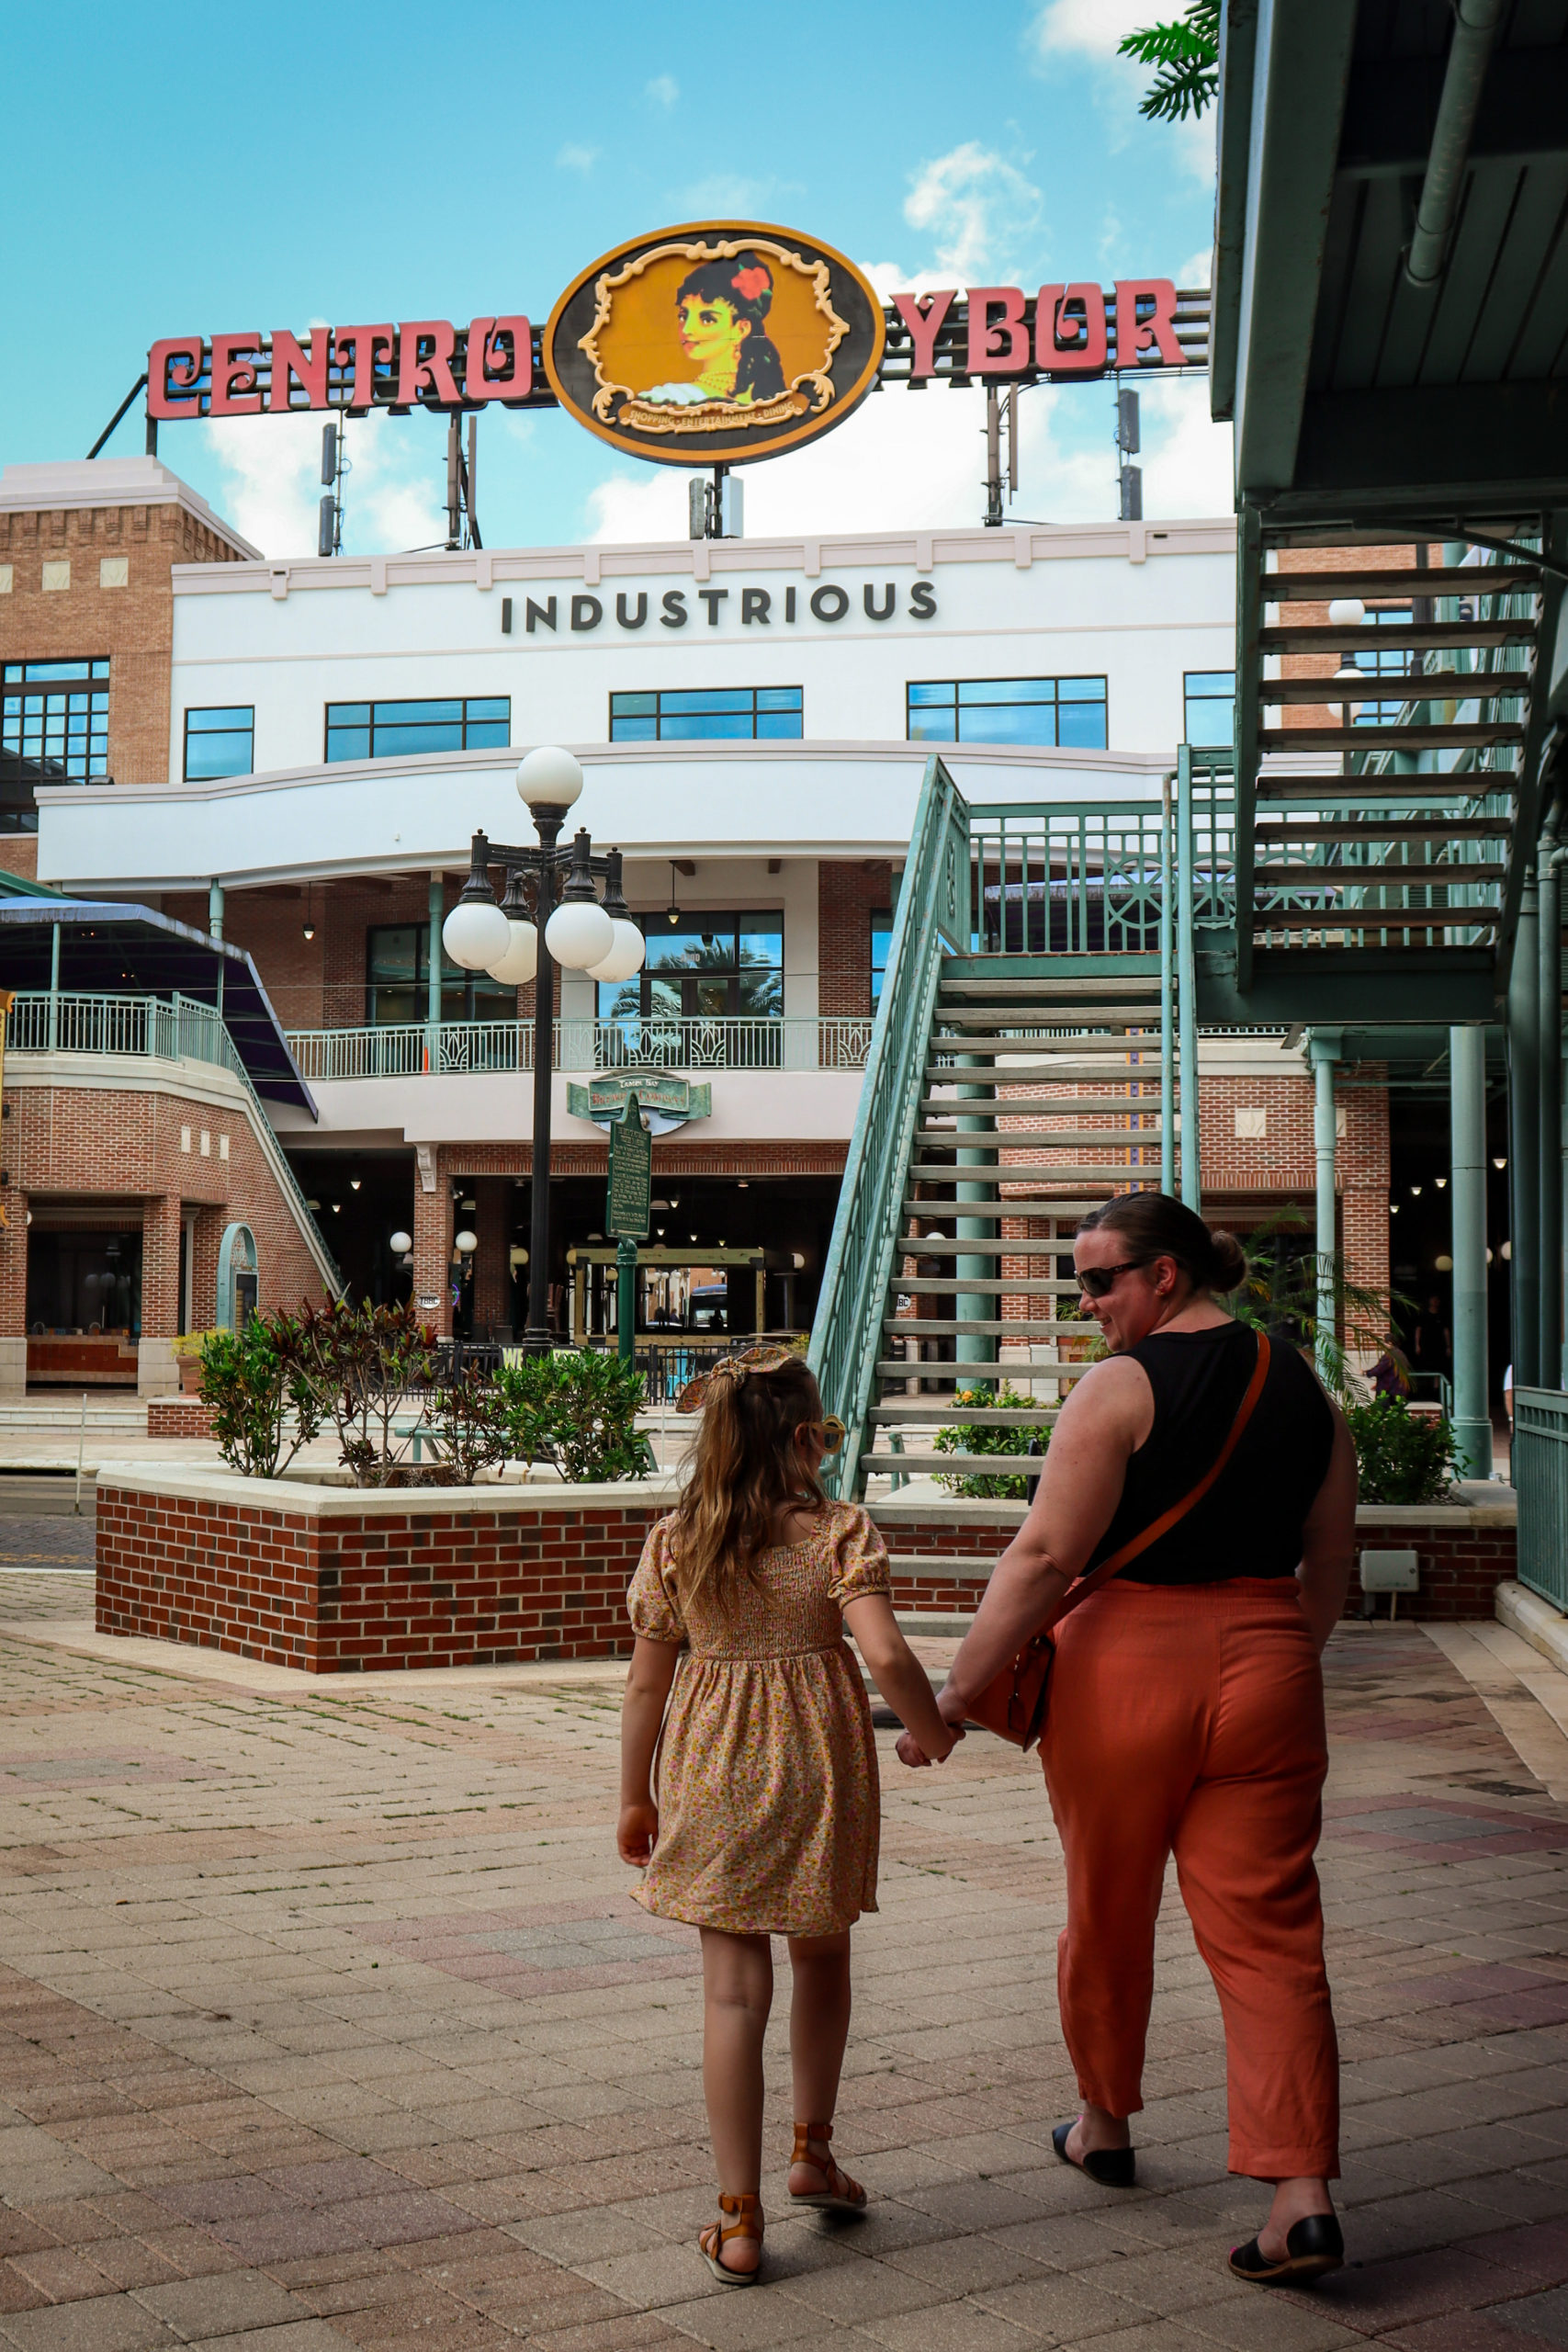 A mom and her young daughter walk around Ybor City.